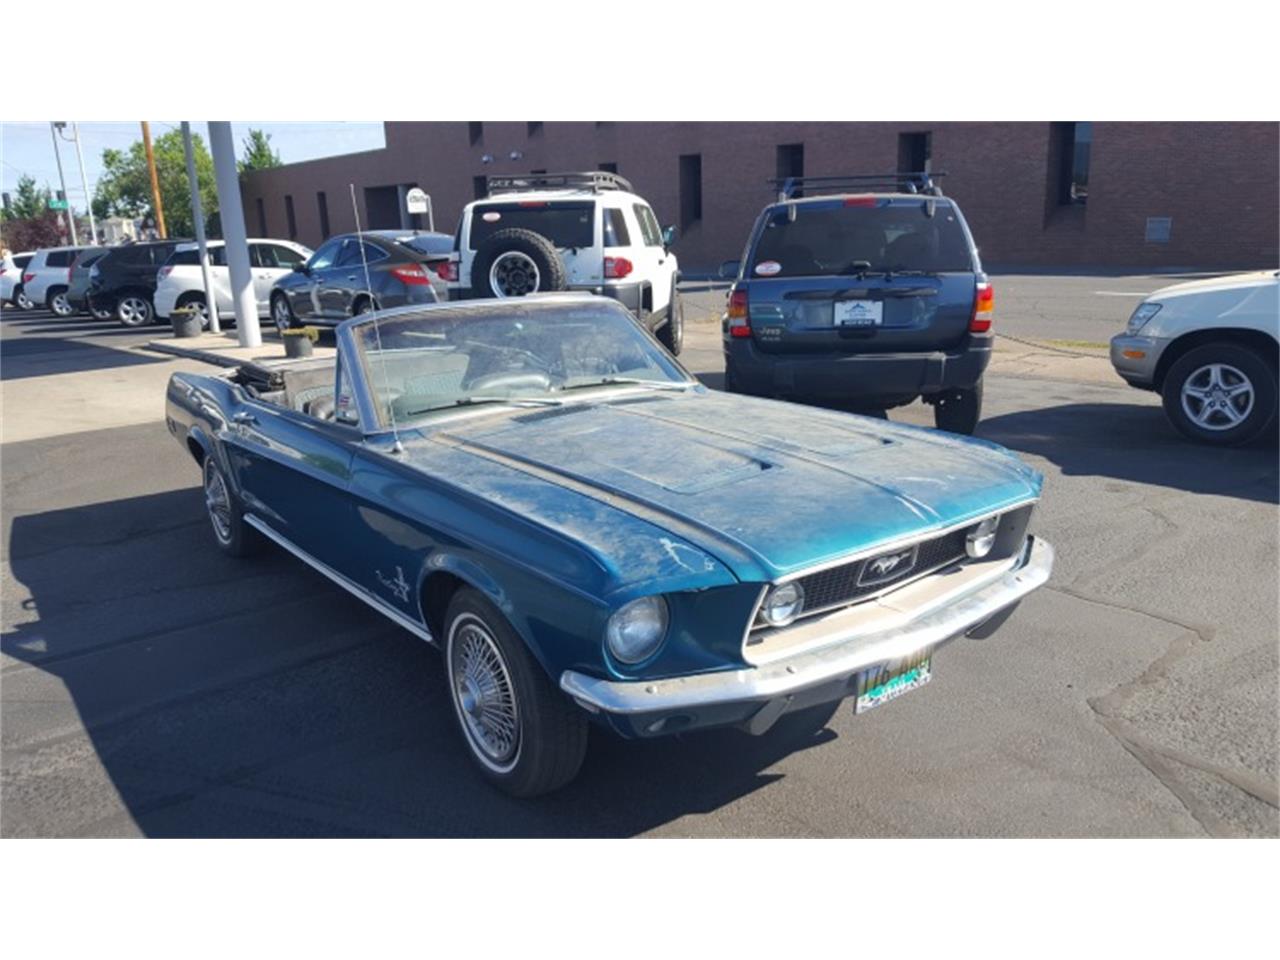 1968 ford mustang for sale in sparks nevada